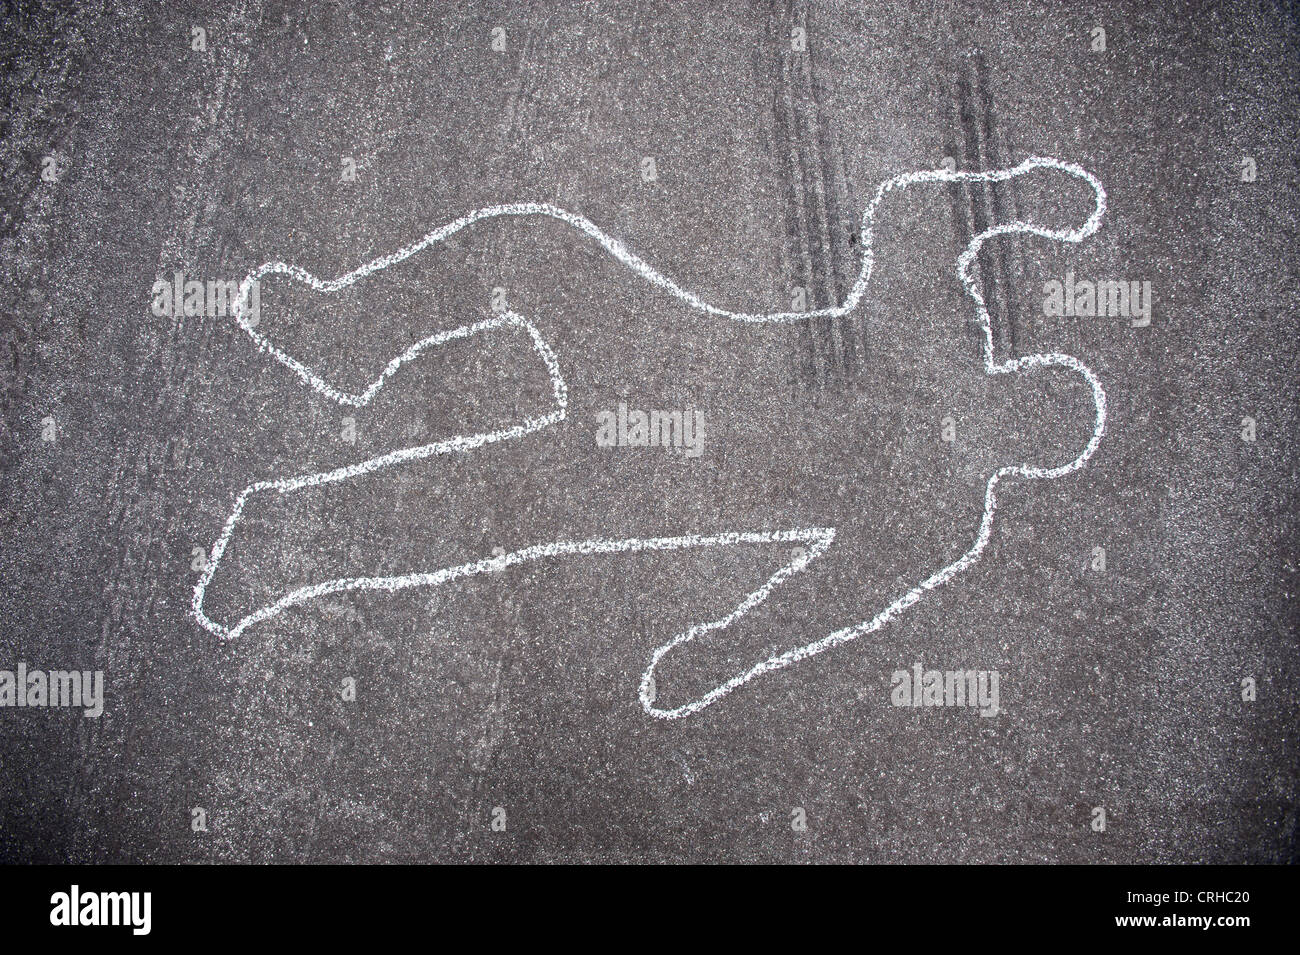 Crime scene chalk line of an auto accident with tire skid marks leading over the body. Stock Photo